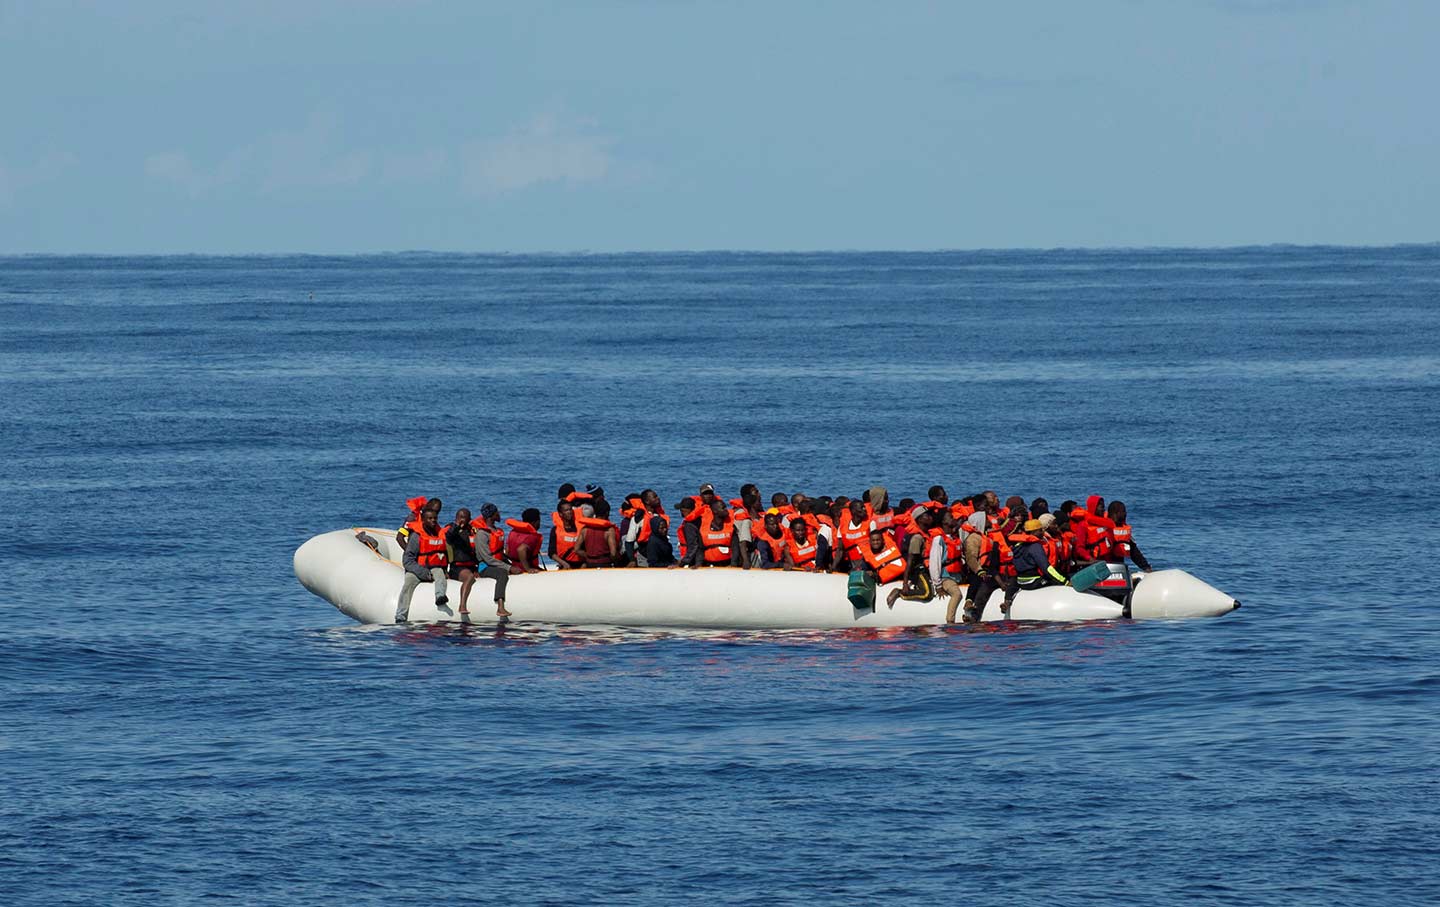 There’s Still No Plan to Deal With Migrants in the Mediterranean